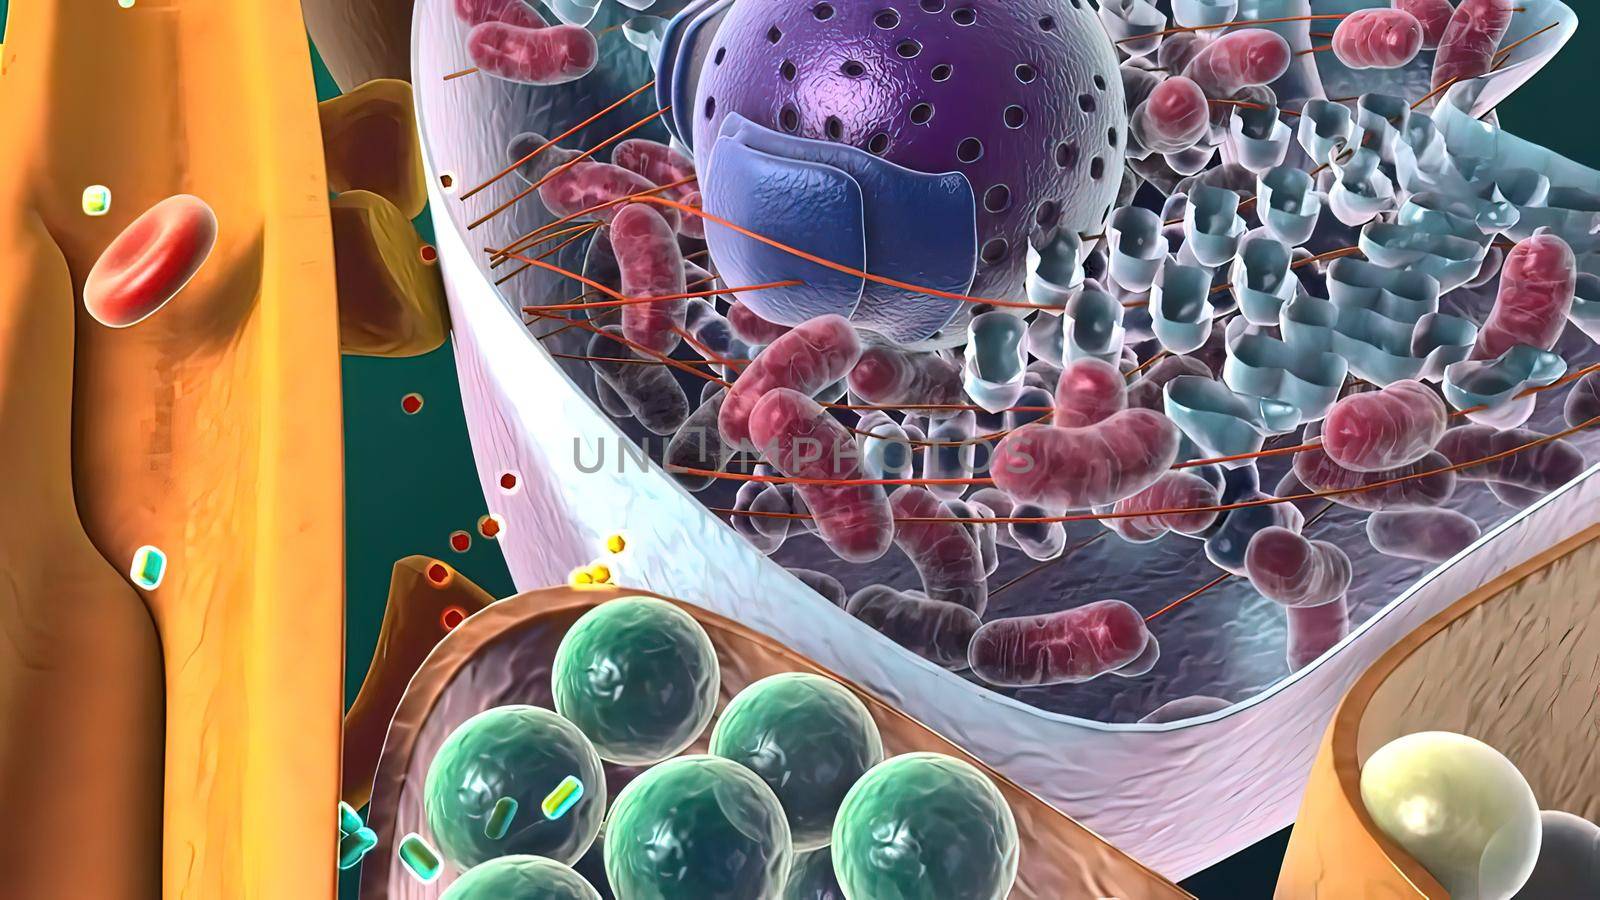 Amyloid Precursor Protein Cleavage, 3d medical illustration by creativepic